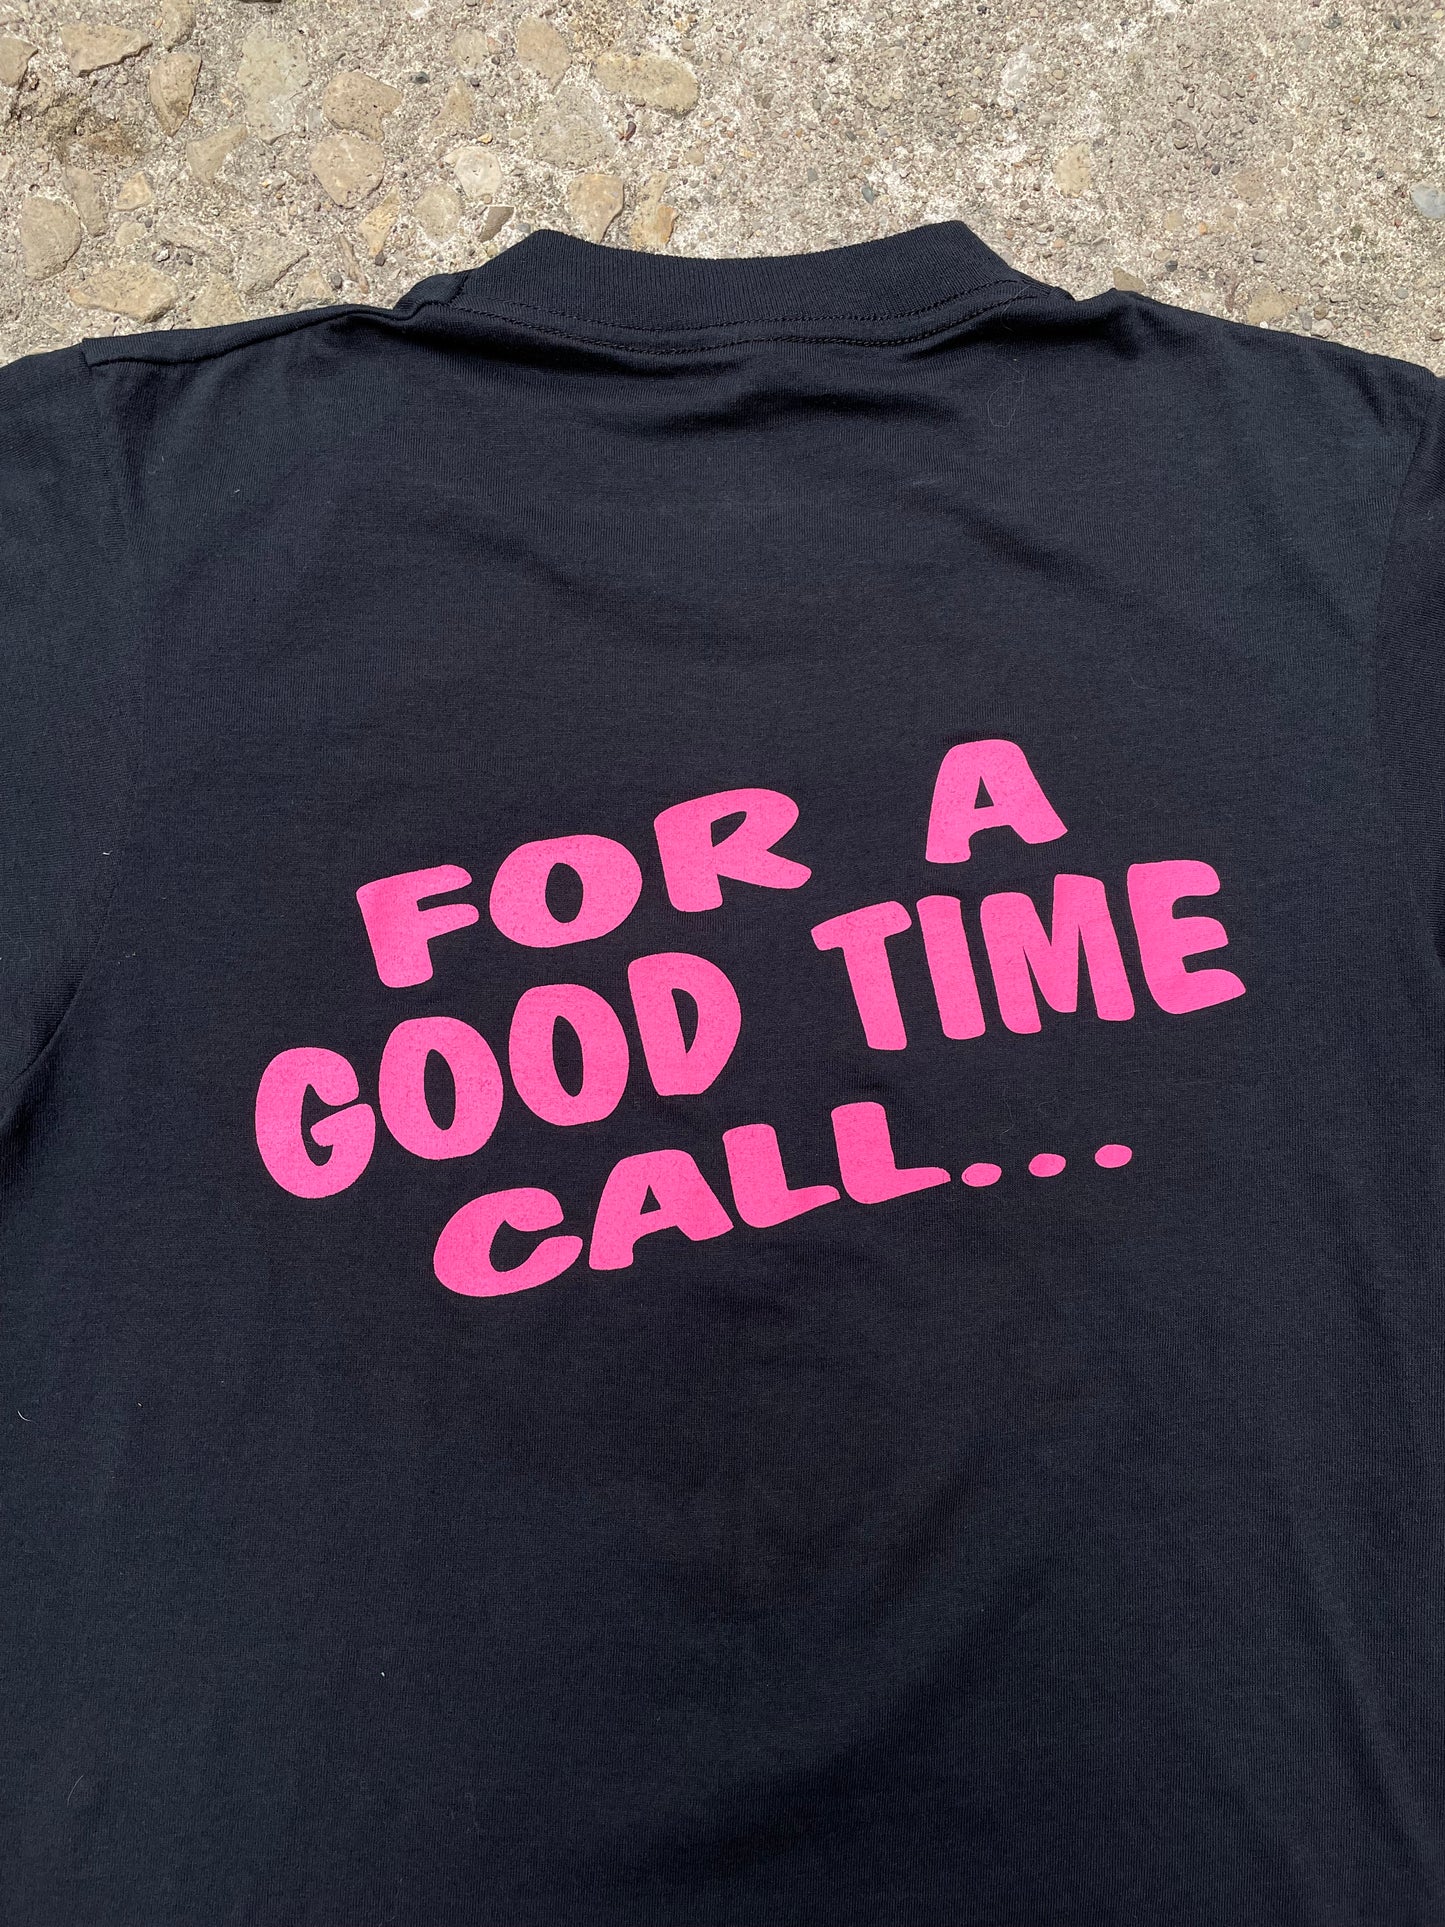 1980's Rachael Ace 'For a Good Time Call...' Graphic T-Shirt - S